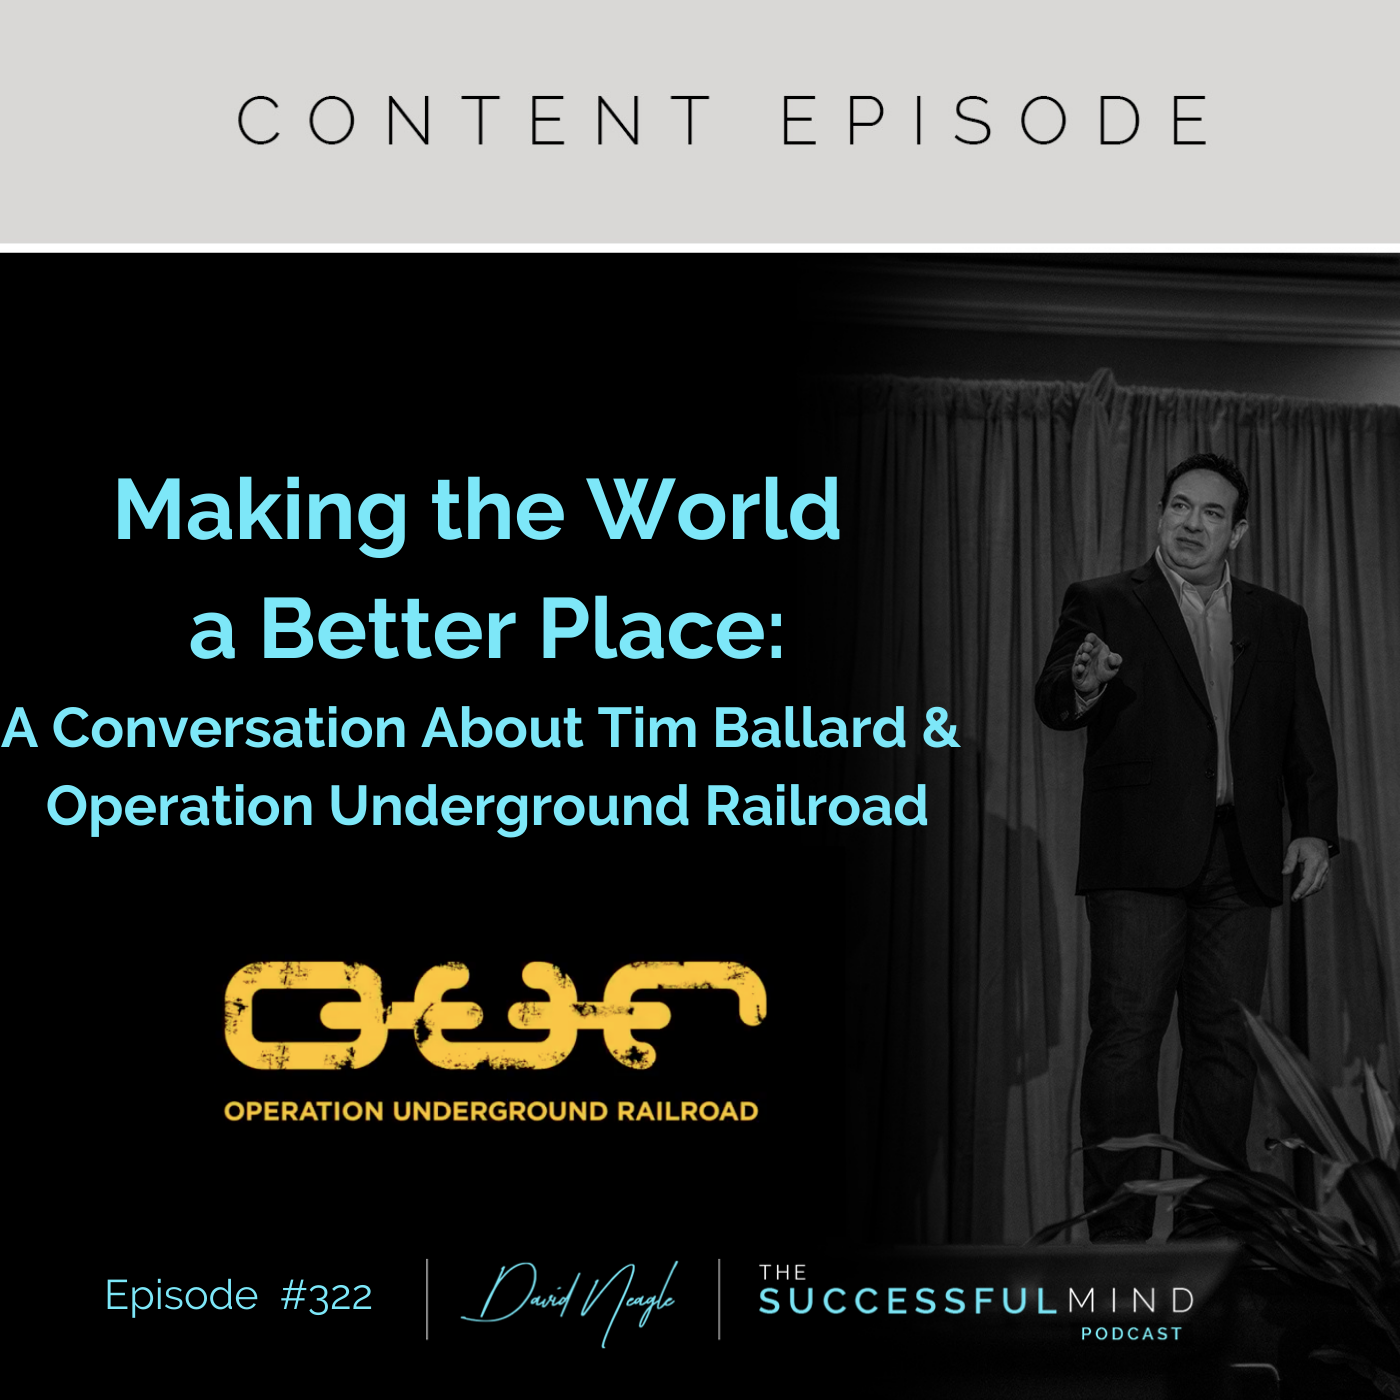 The Successful Mind Podcast -Episode 322 - Making the World a Better Place